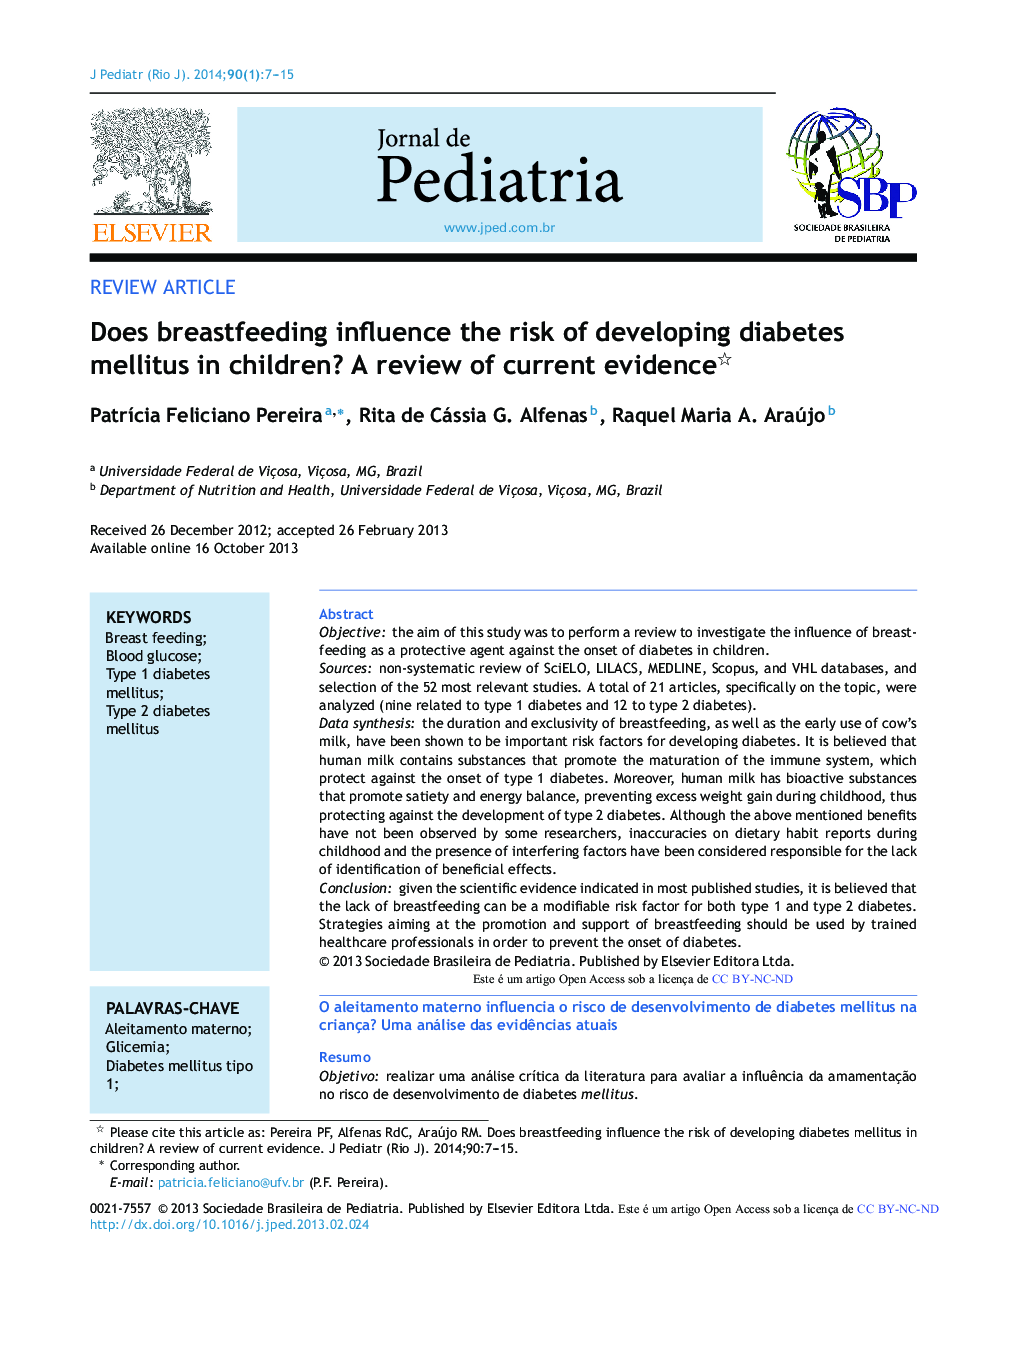 Does breastfeeding influence the risk of developing diabetes mellitus in children? A review of current evidence 